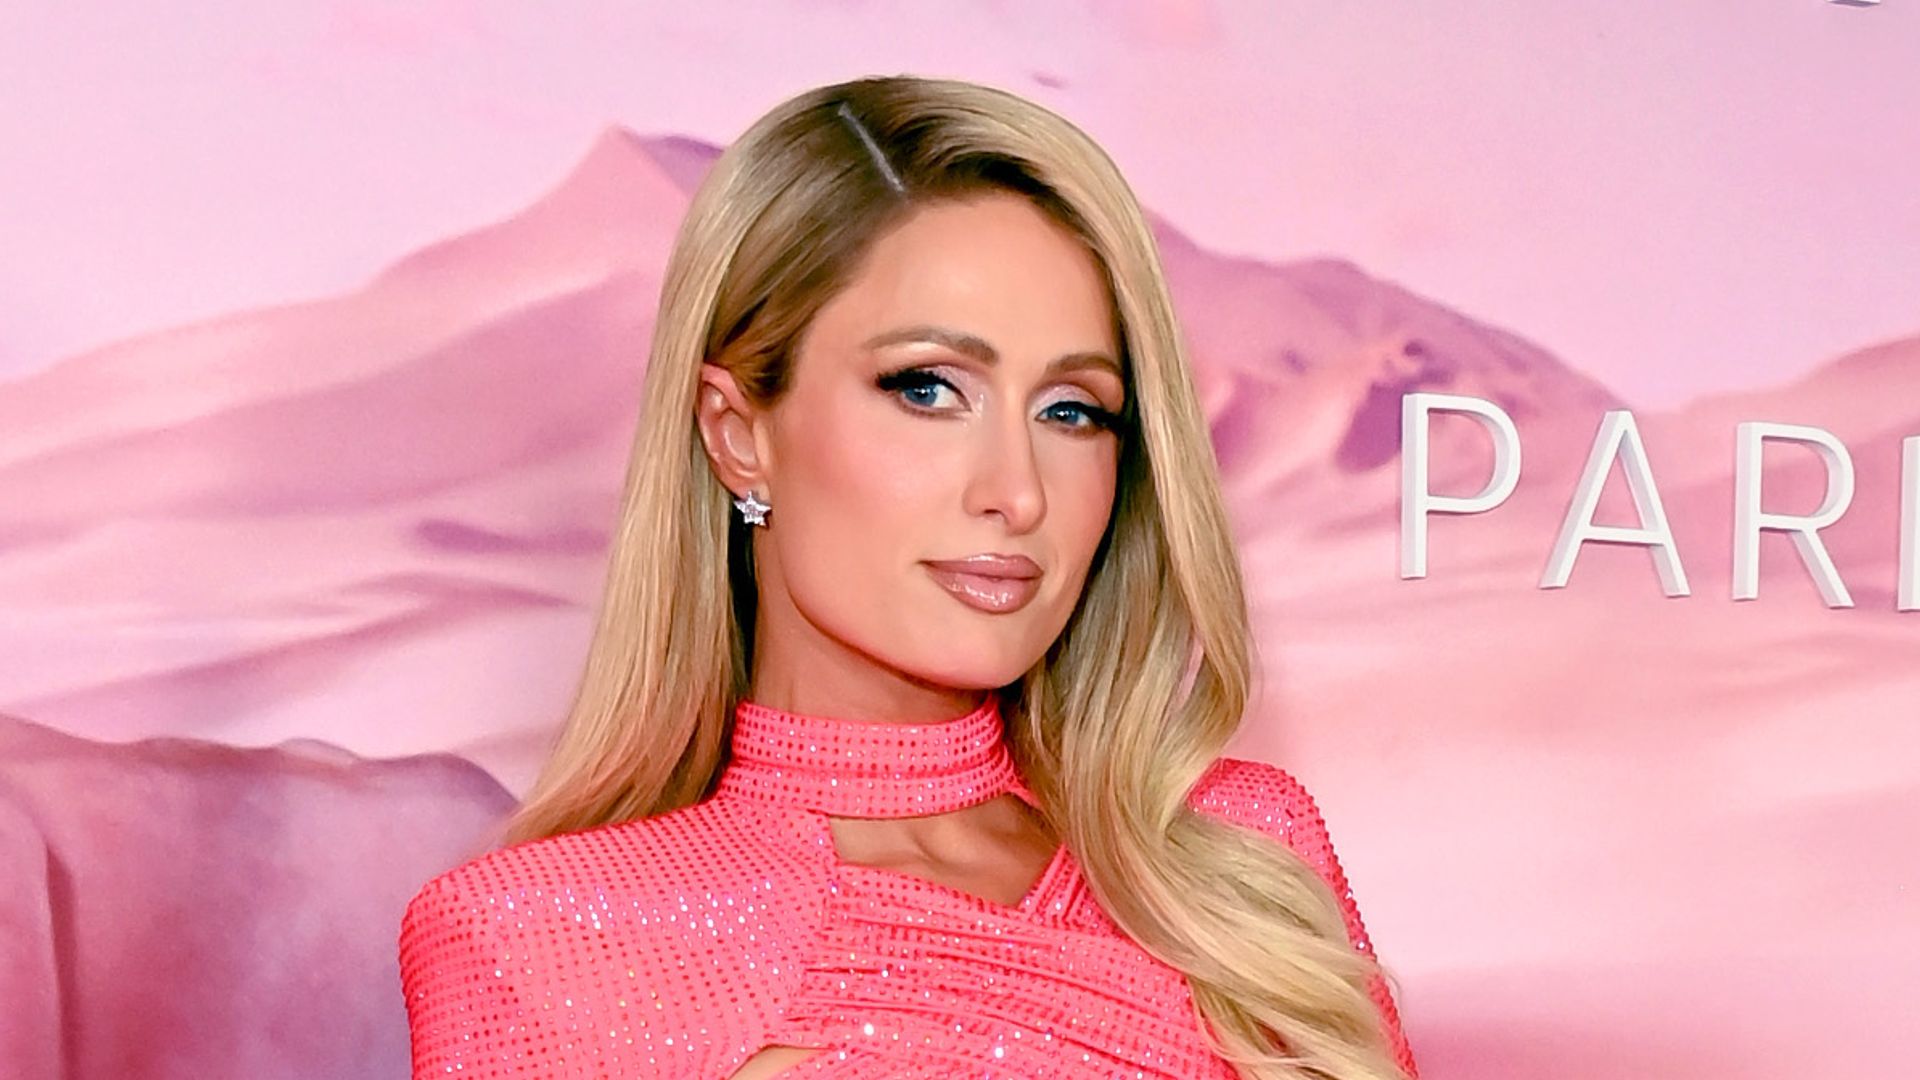 Paris Hilton just wore the most 2000s outfit ever